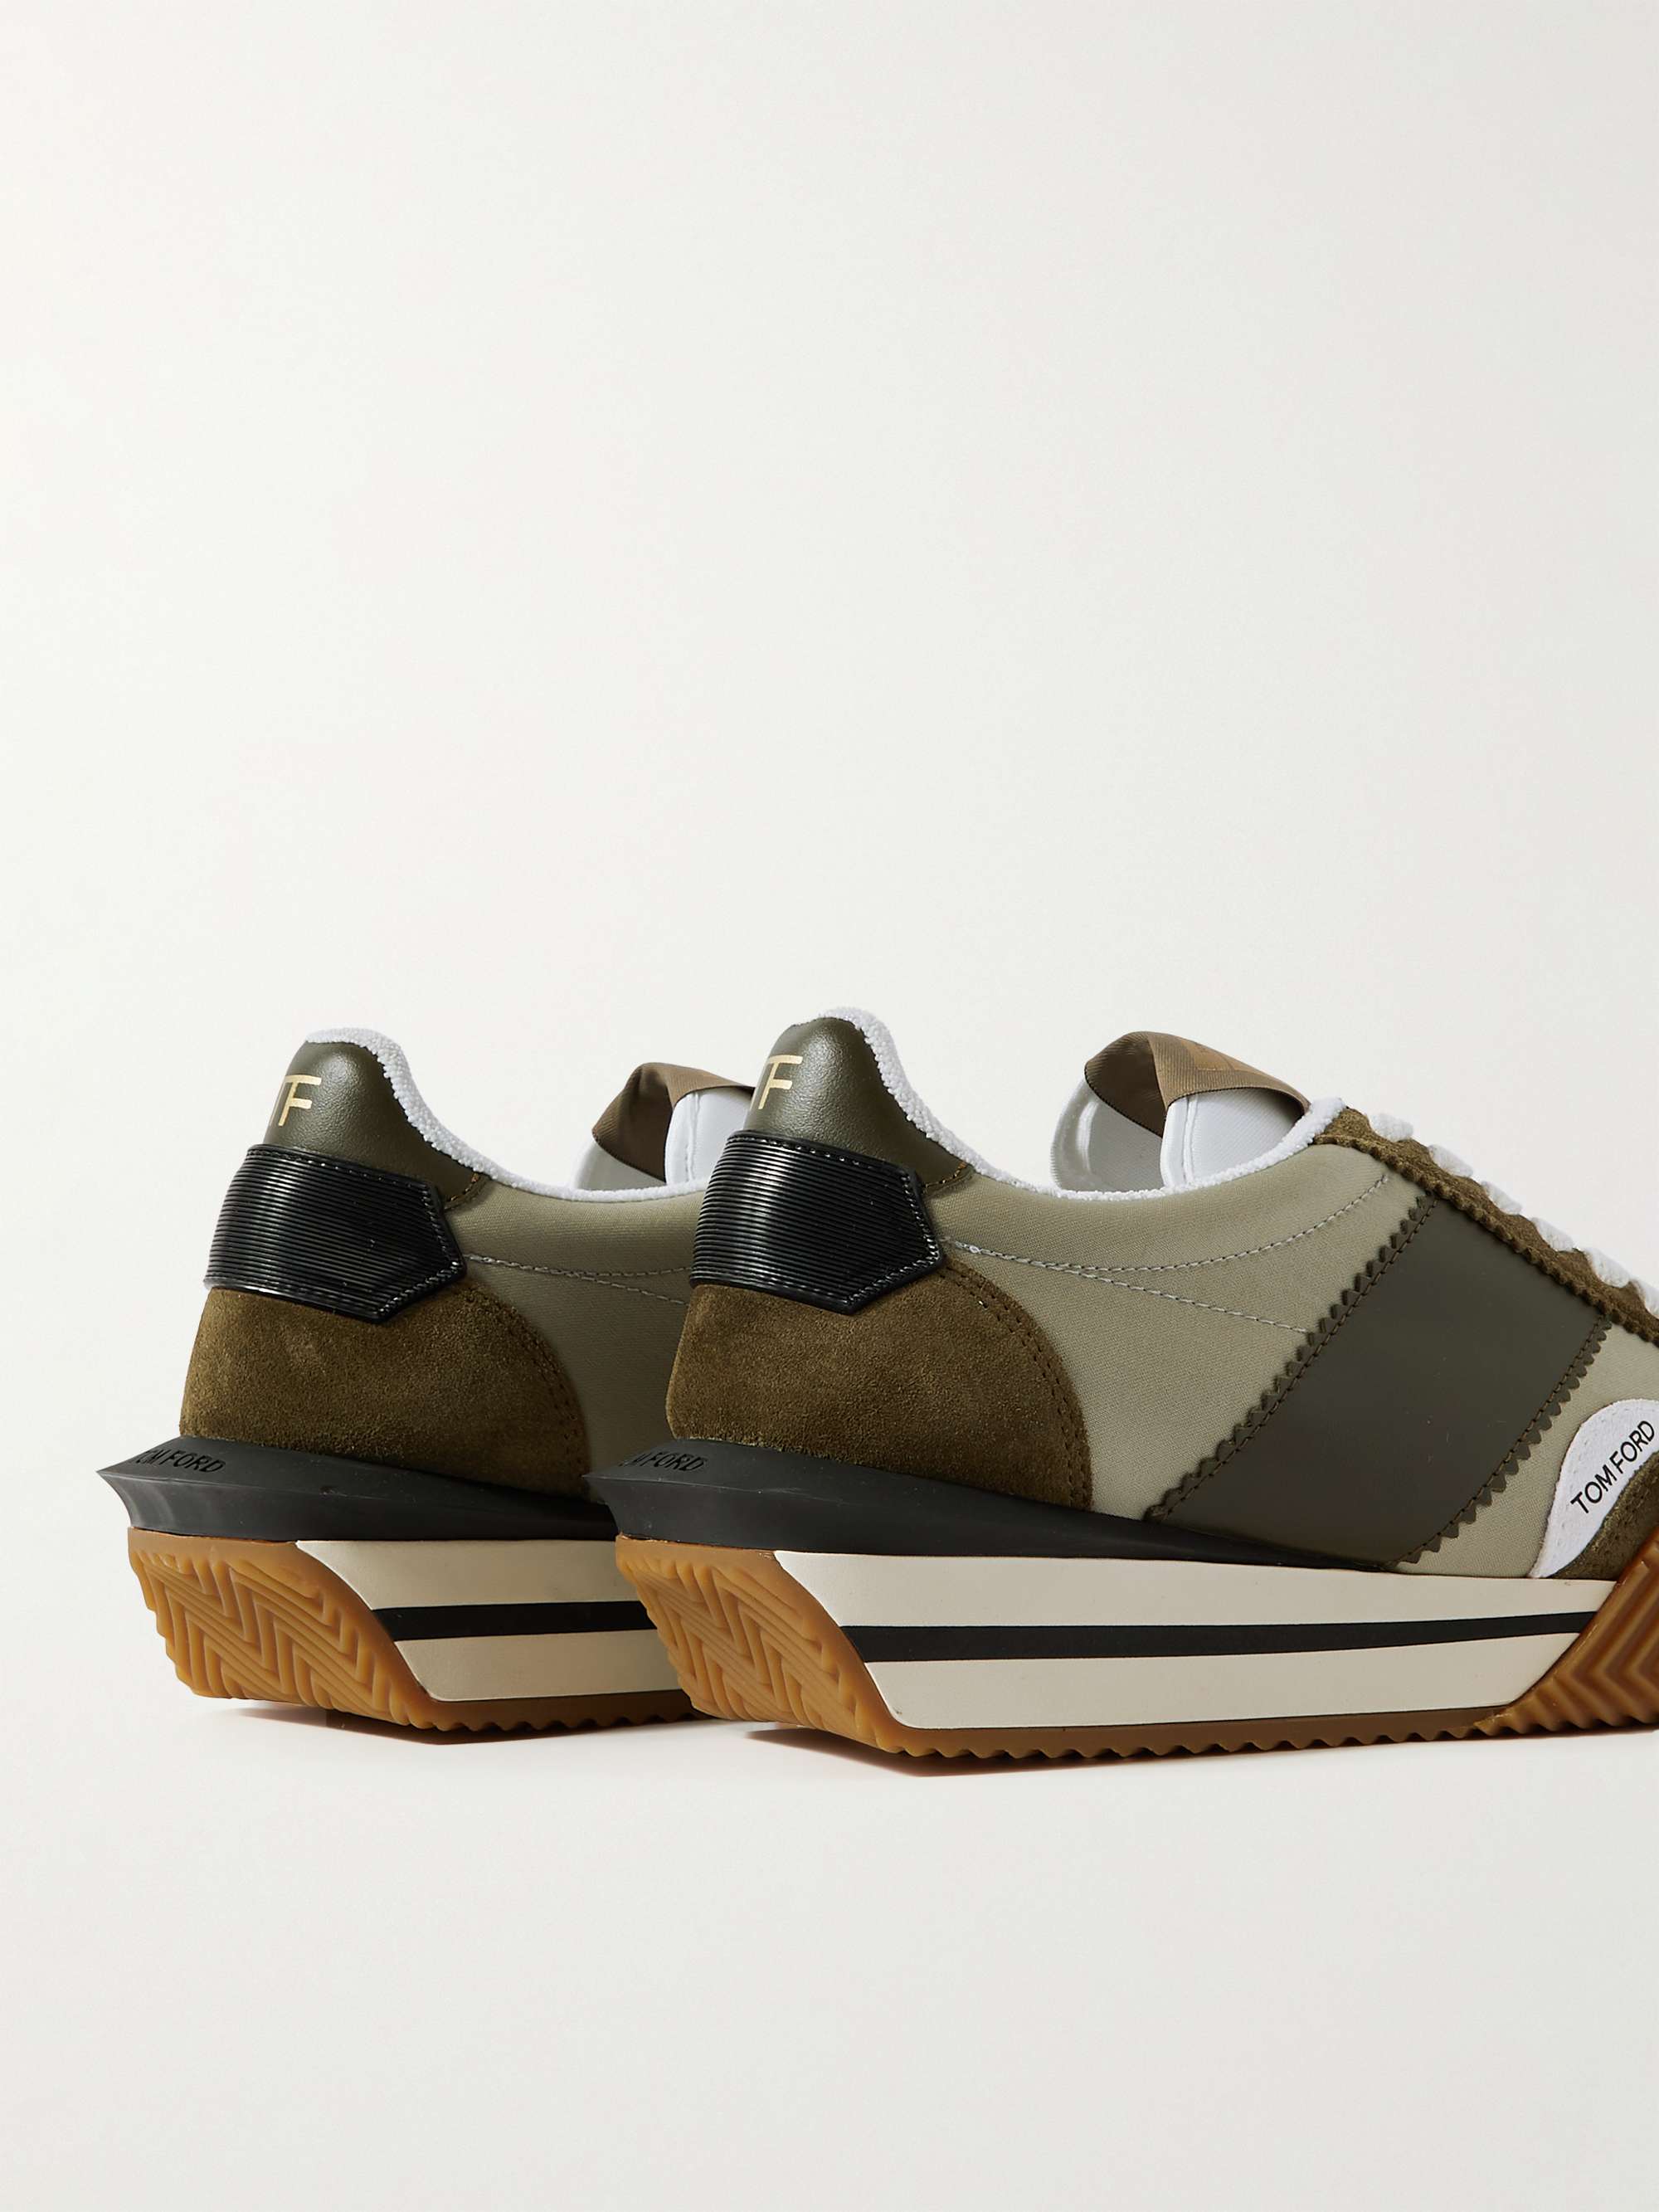 TOM FORD James Rubber-Trimmed Leather, Suede and Nylon Sneakers | MR PORTER